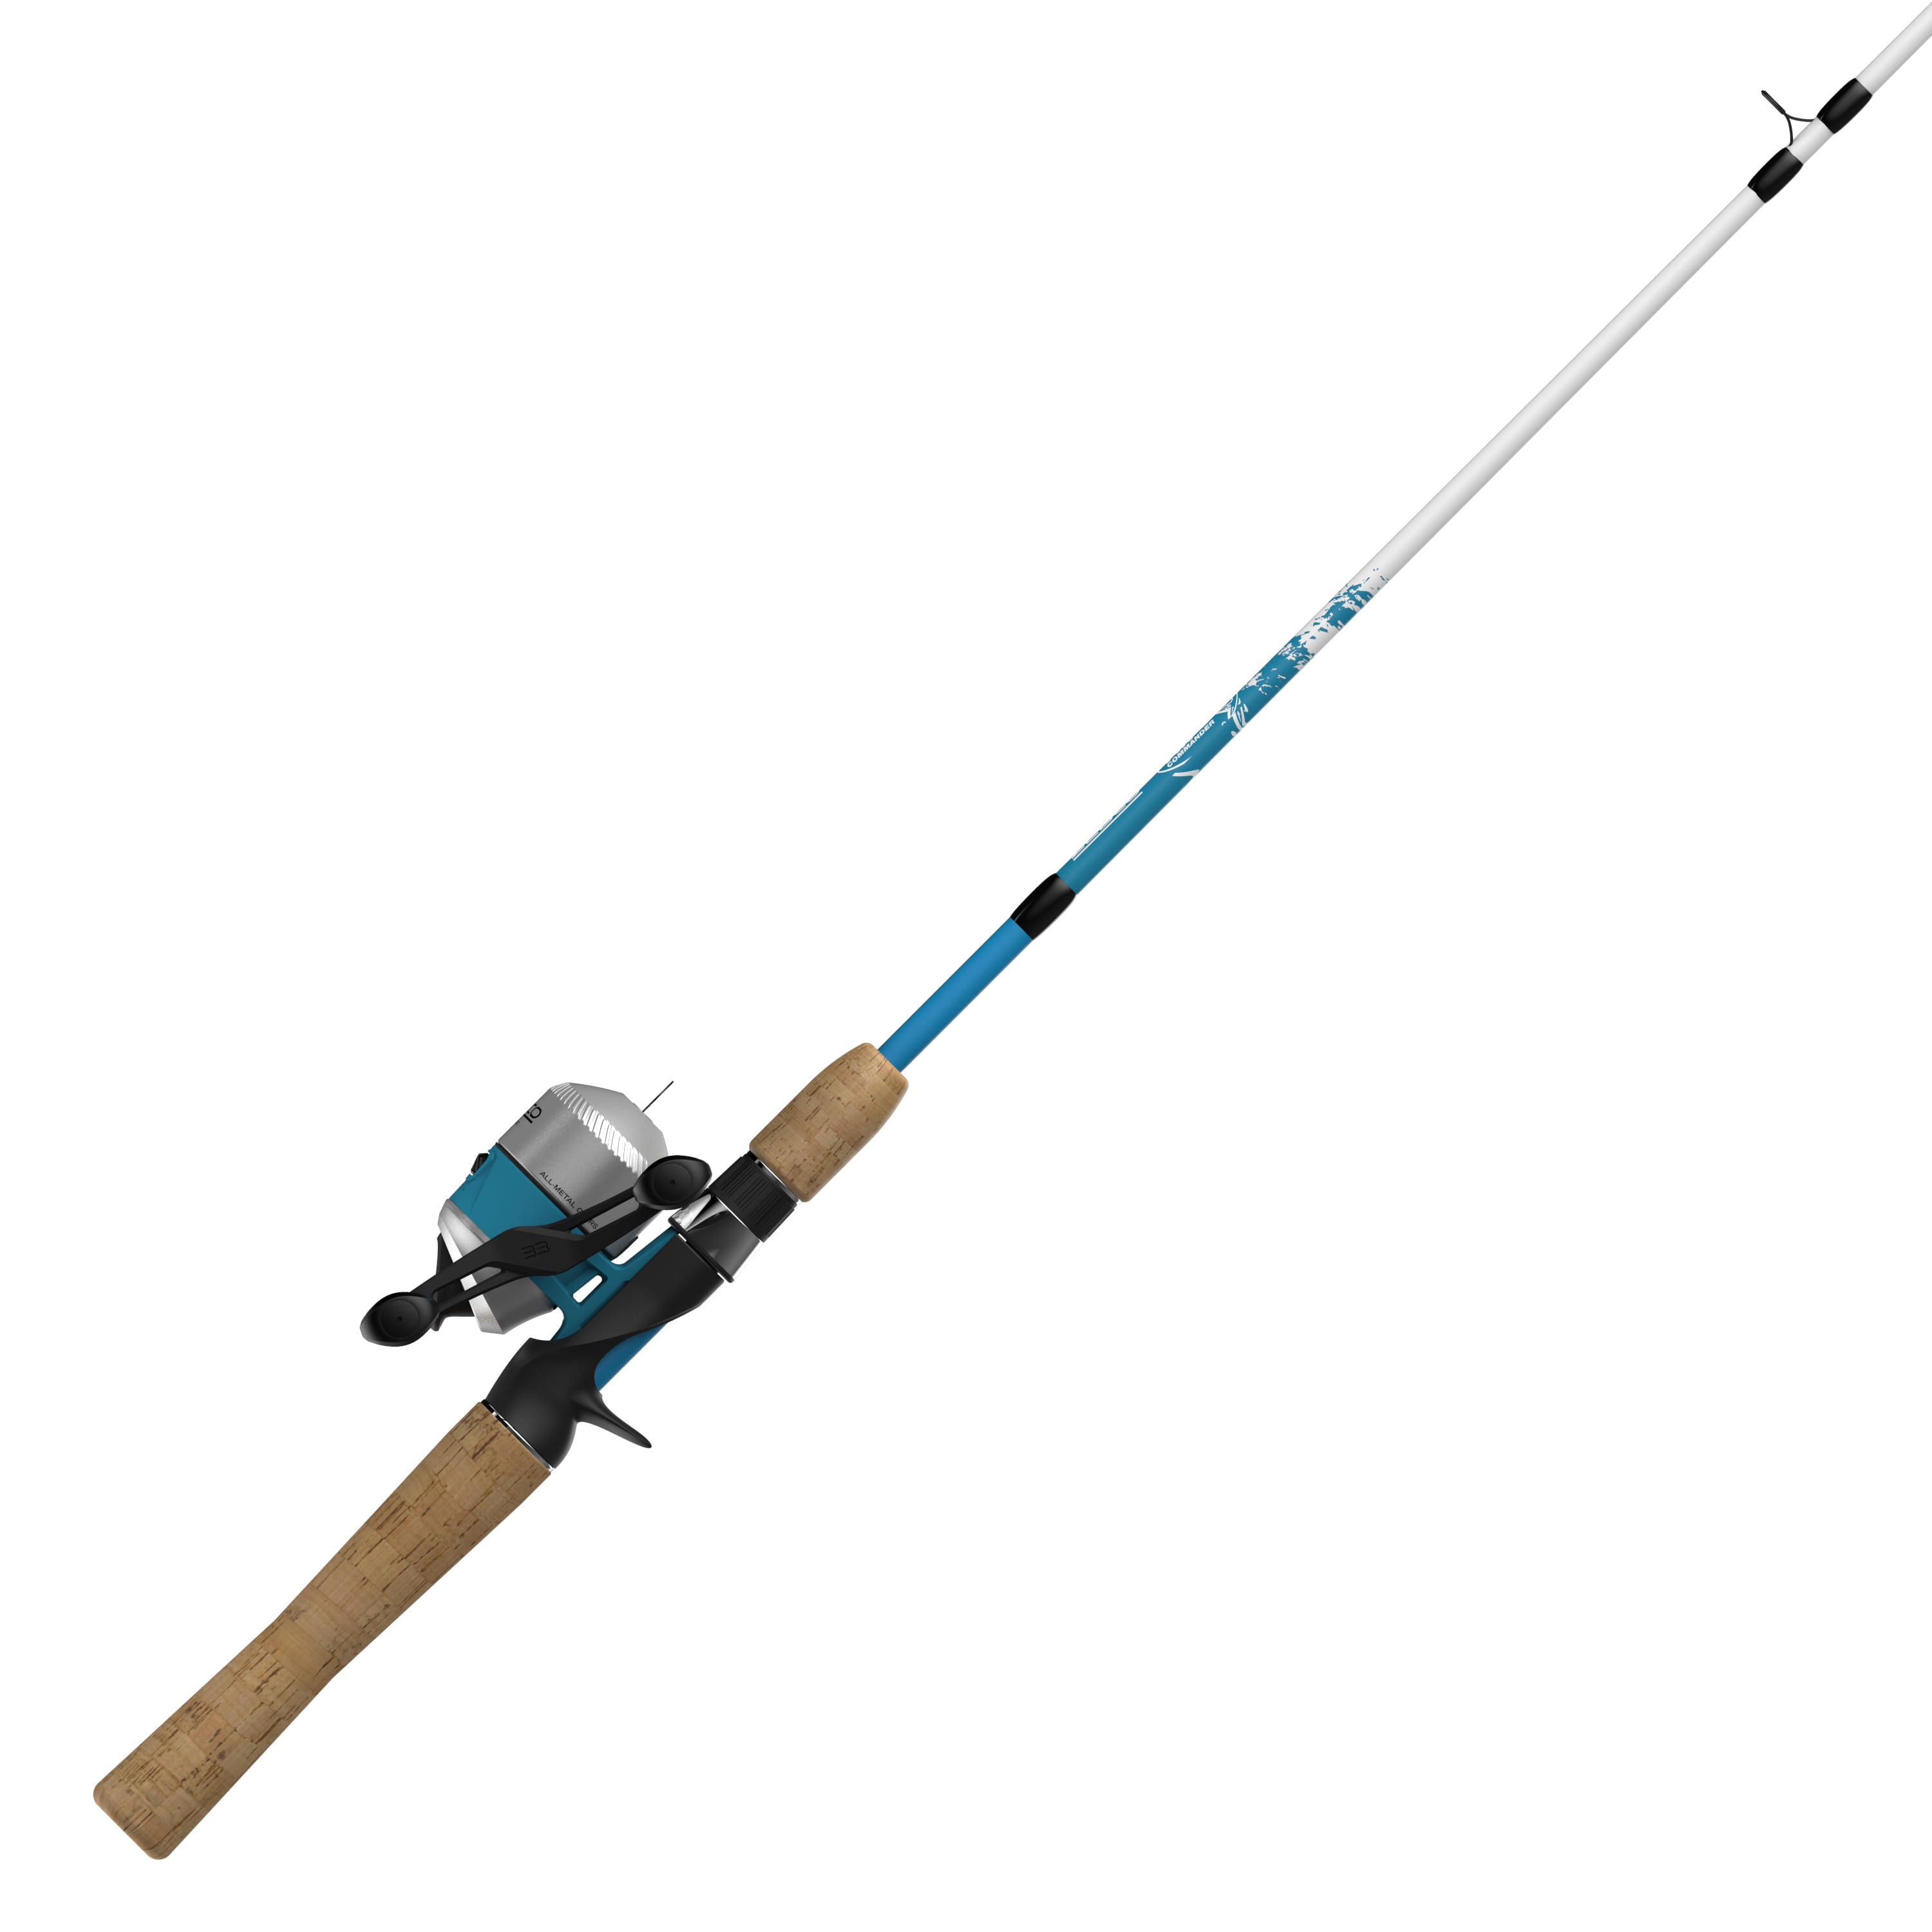 Zebco Fin Commander Spincast Reel and Fishing Rod Combo, 5-Foot 2-Piece Fishing  Pole, Size 10 Reel, Changeable Right- or Left-Hand Retrieve, Pre-Spooled  with 4-Pound Cajun Line, Blue 